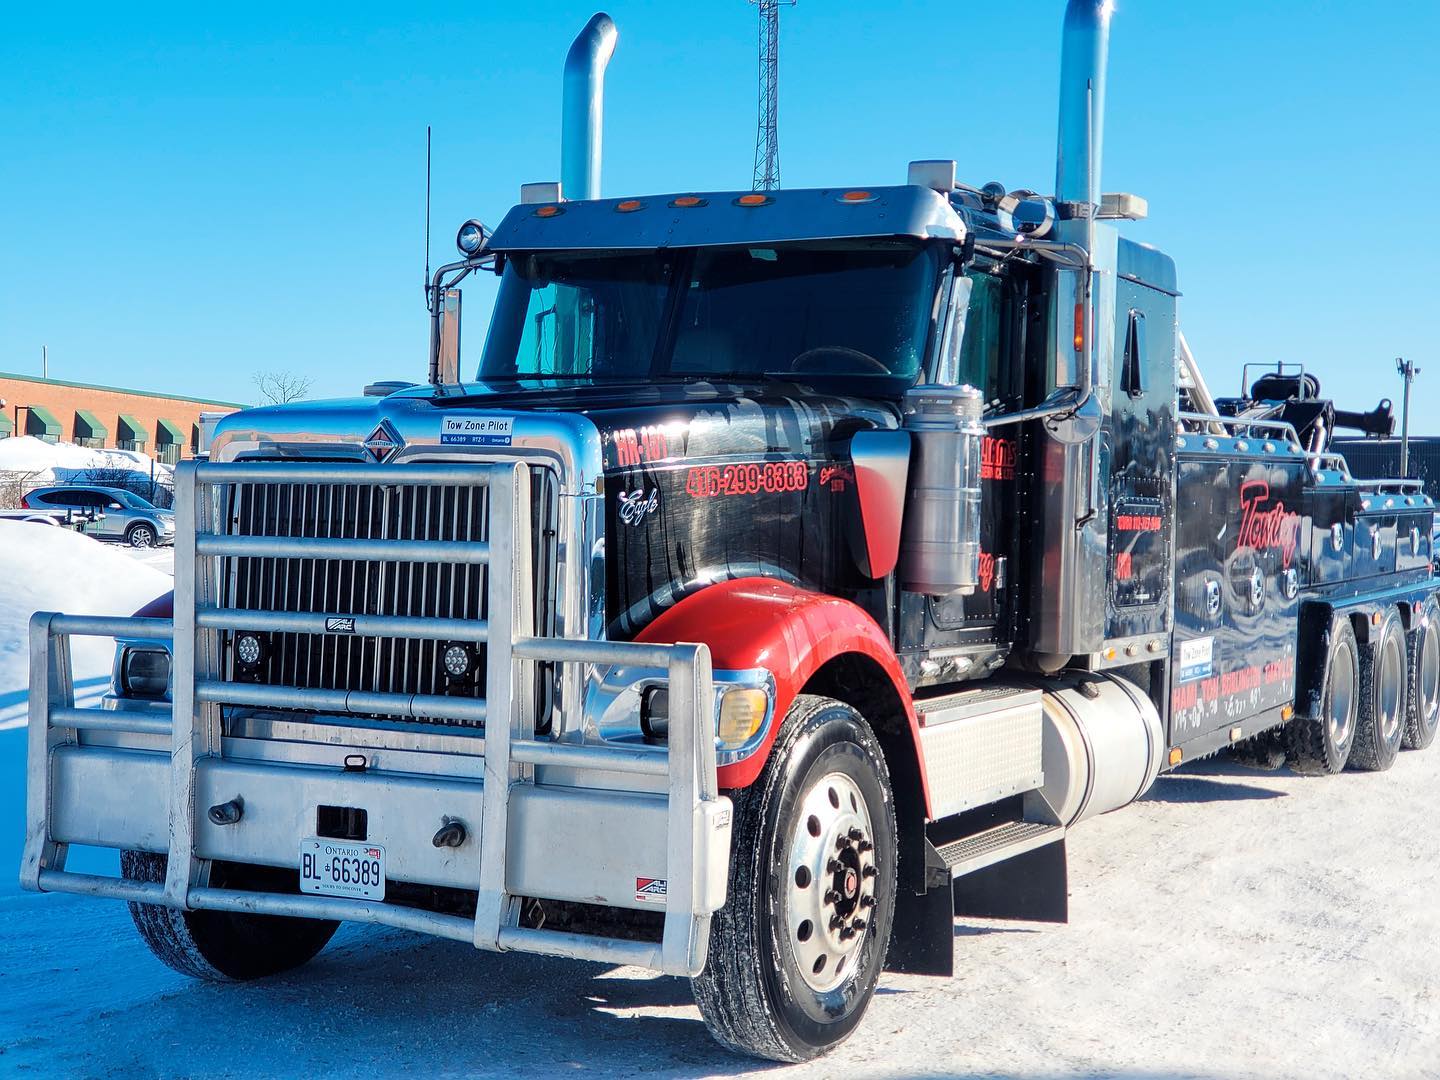 Williams Towing - Specialized Towing Services in Toronto | Williams Towing